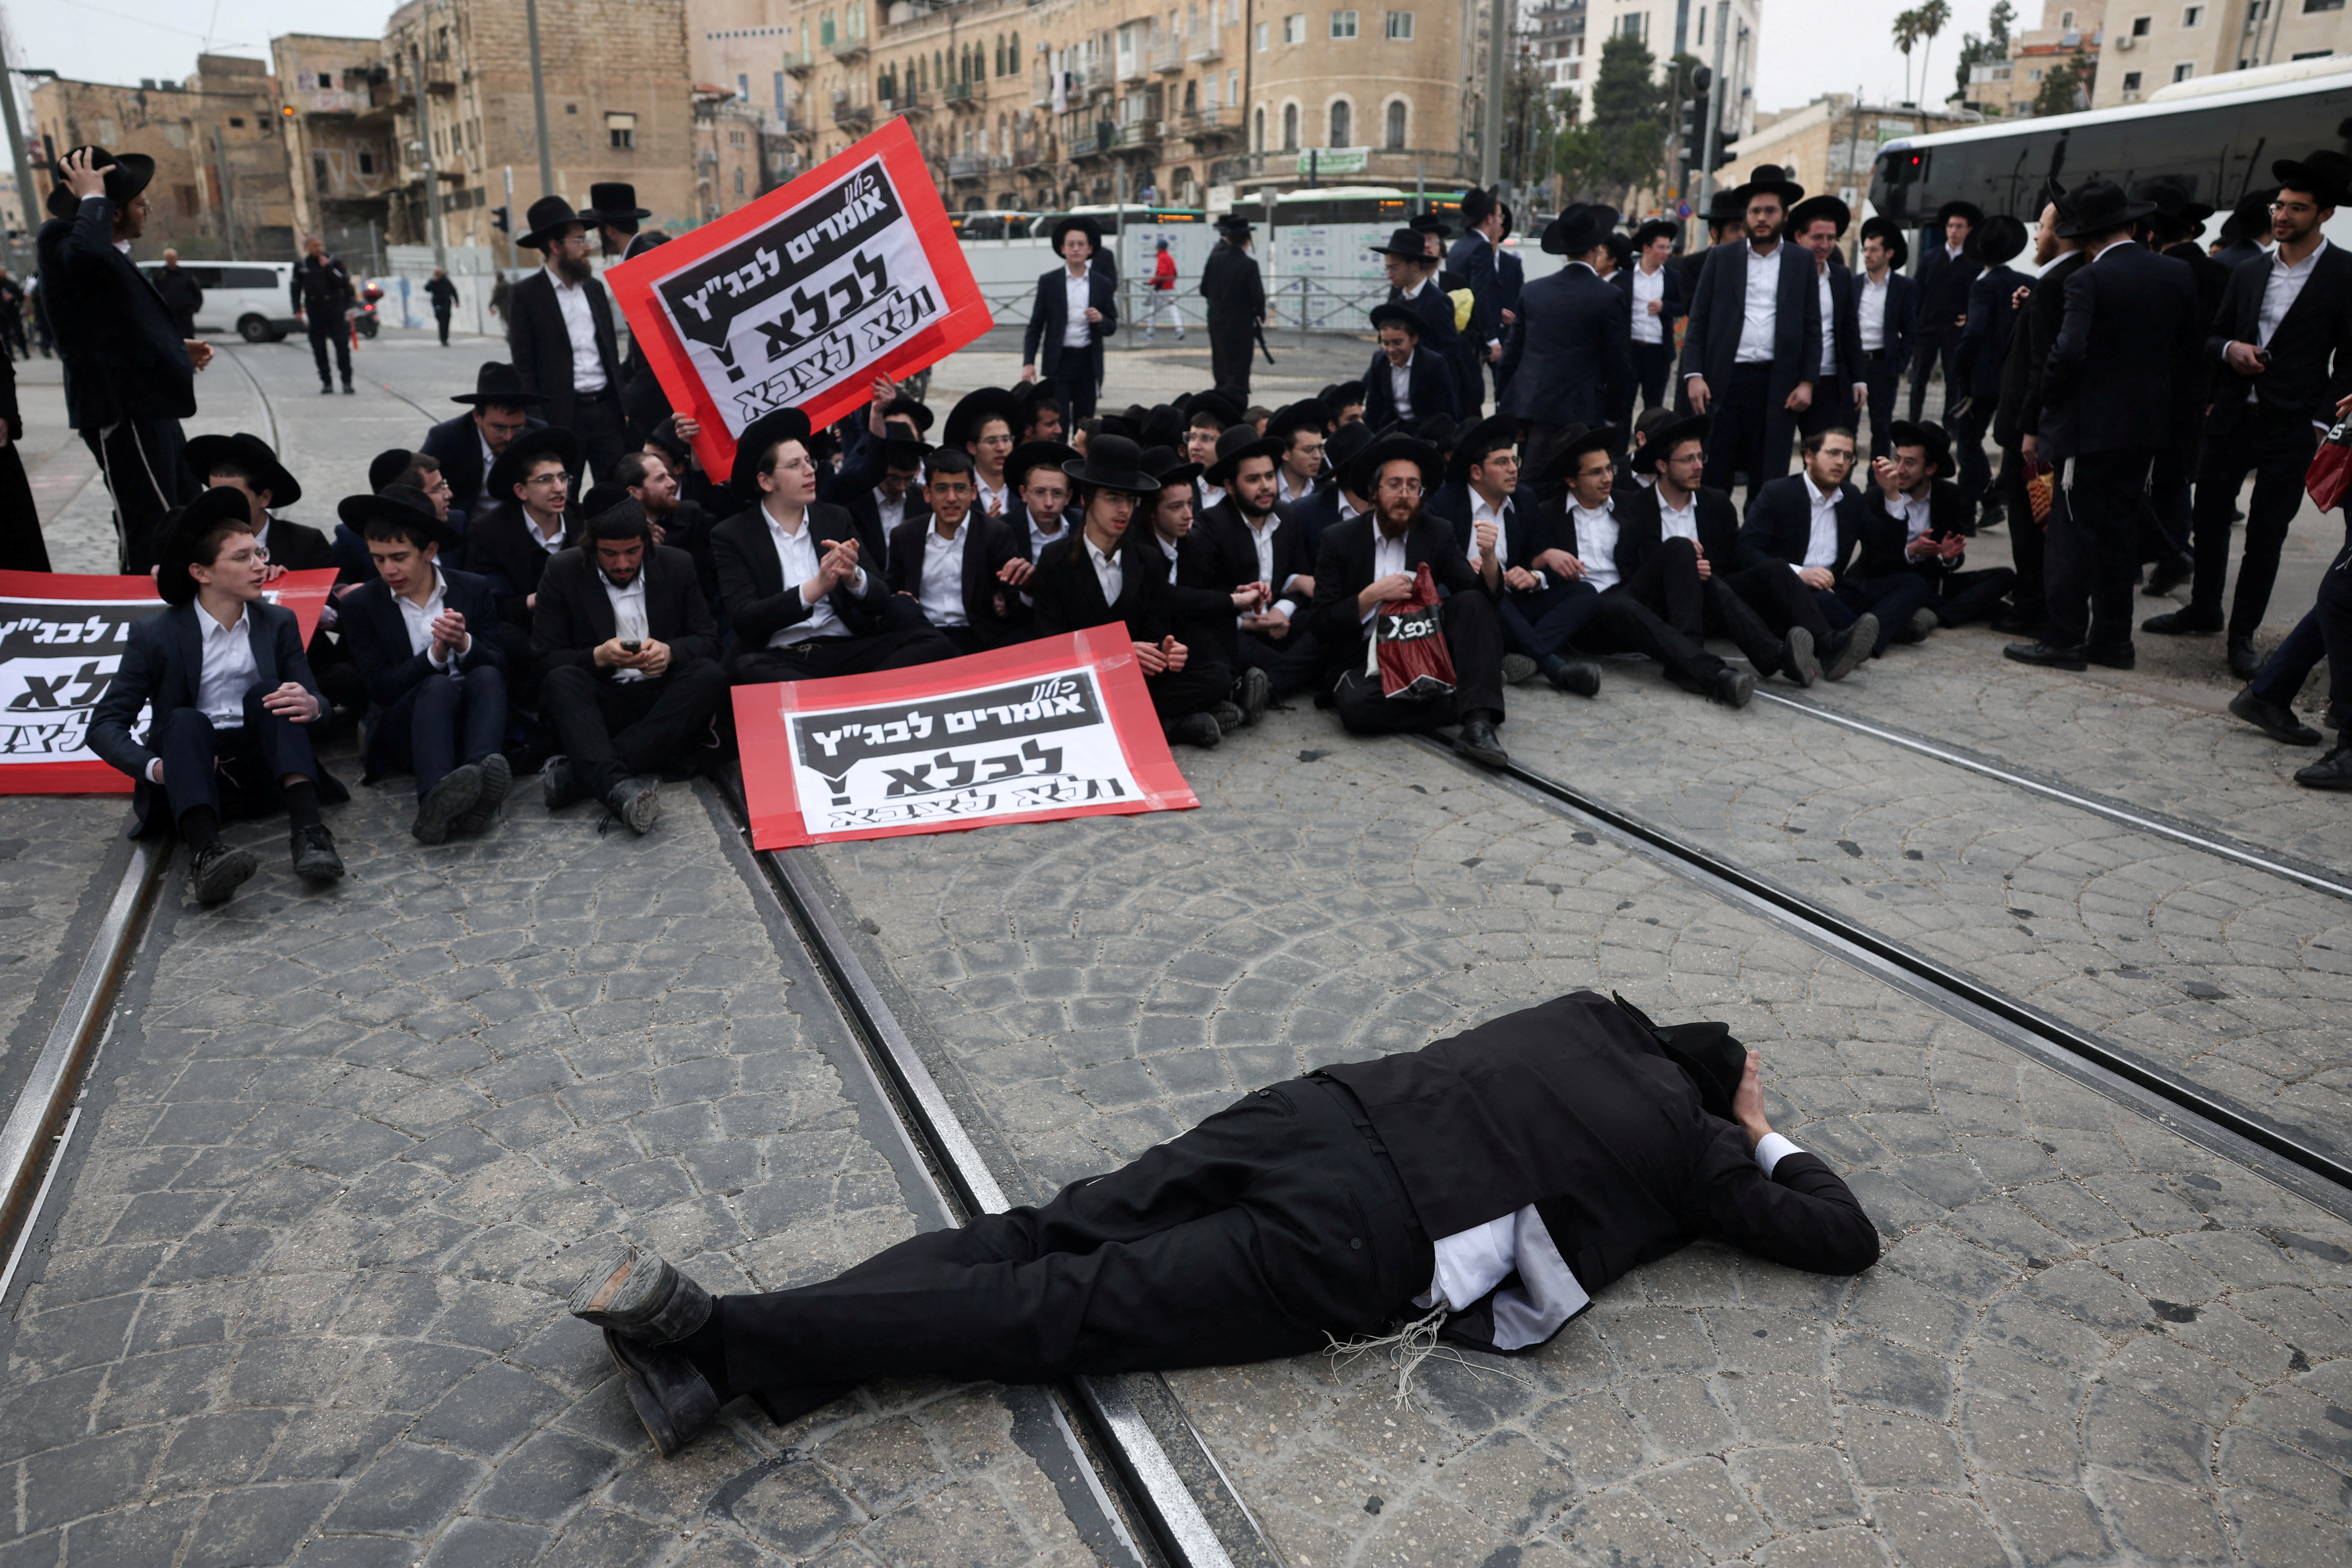 Ultra-Ortodox Jewish men protest against attempts to change government policy that grants ultra-Orthodox Jews exemptions from military conscription, in Jerusalem